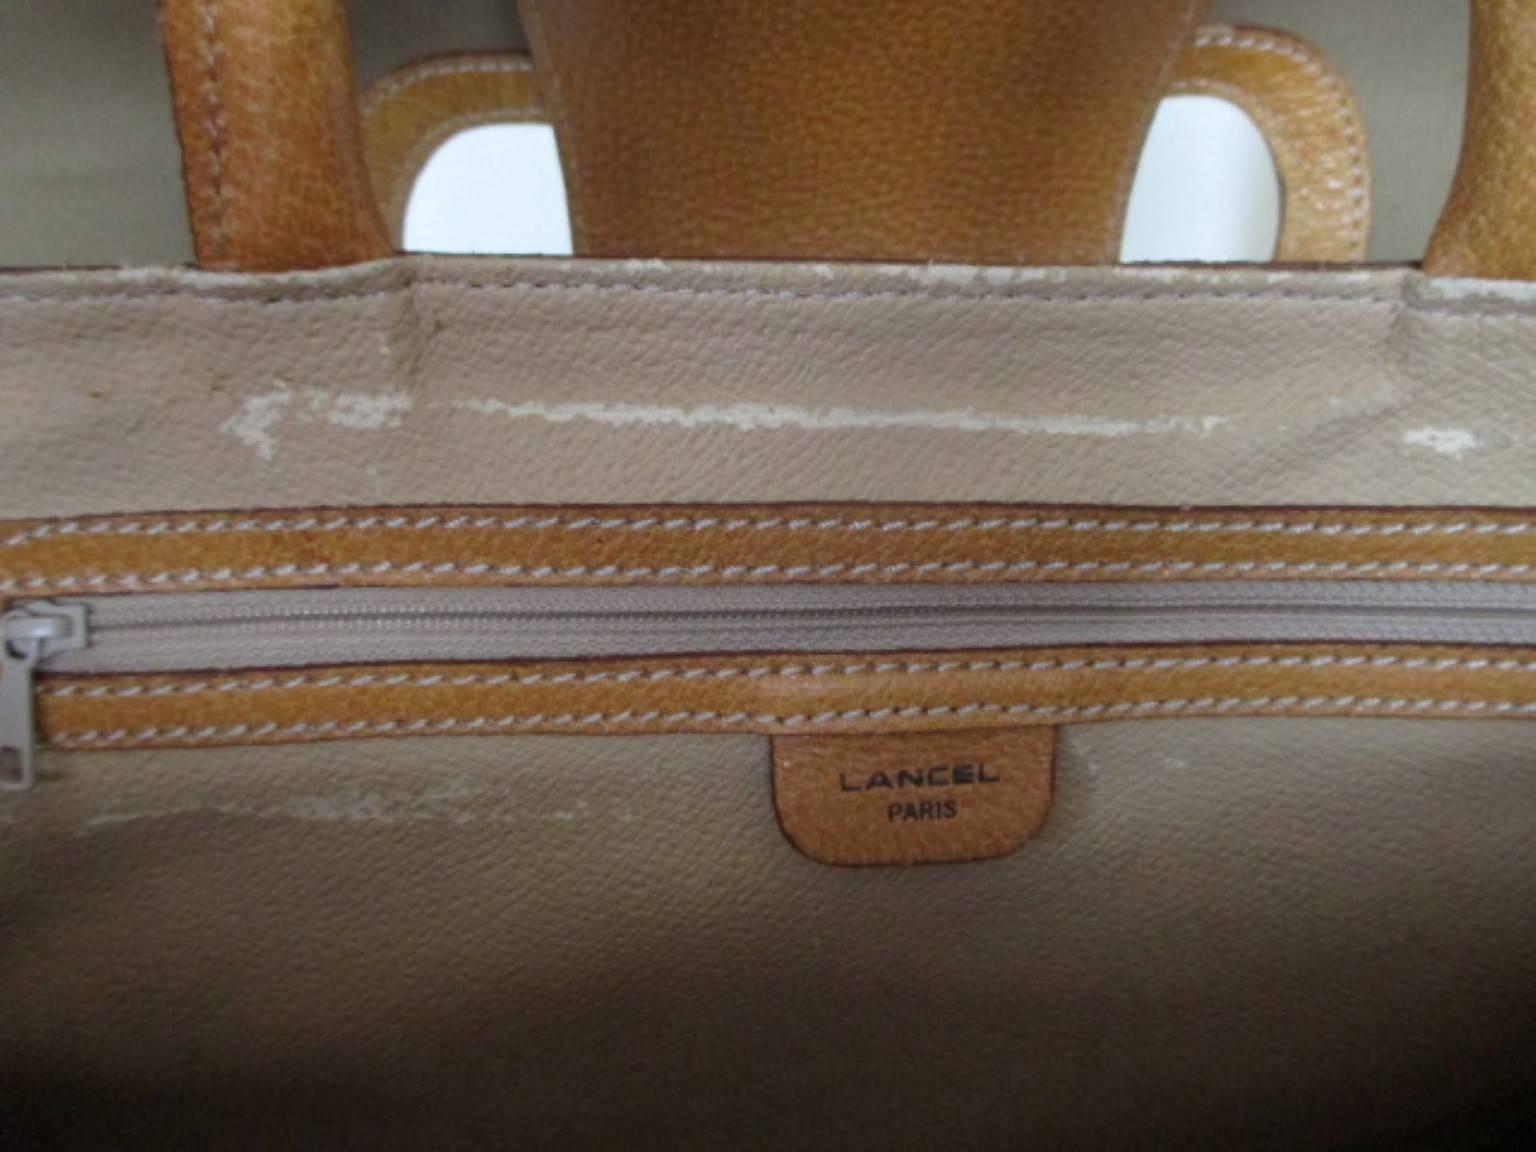 Lancel Paris Leather Travel Weekend Bag In Good Condition For Sale In Amsterdam, NL